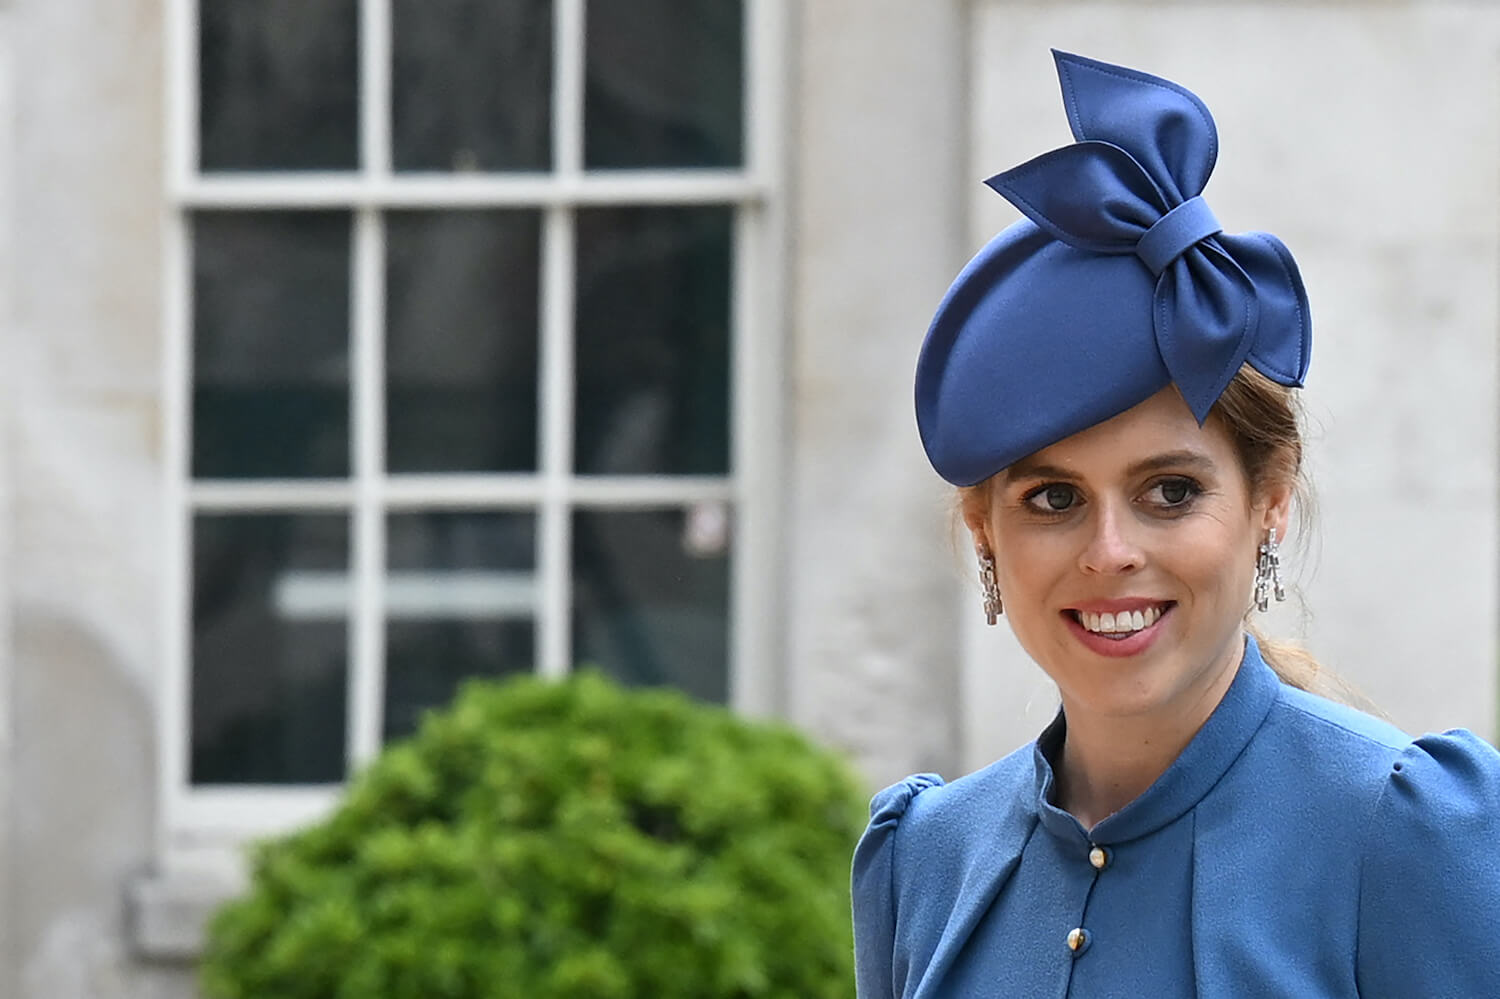 Princess Beatrice and Princess Charlotte have a close bond and special affection